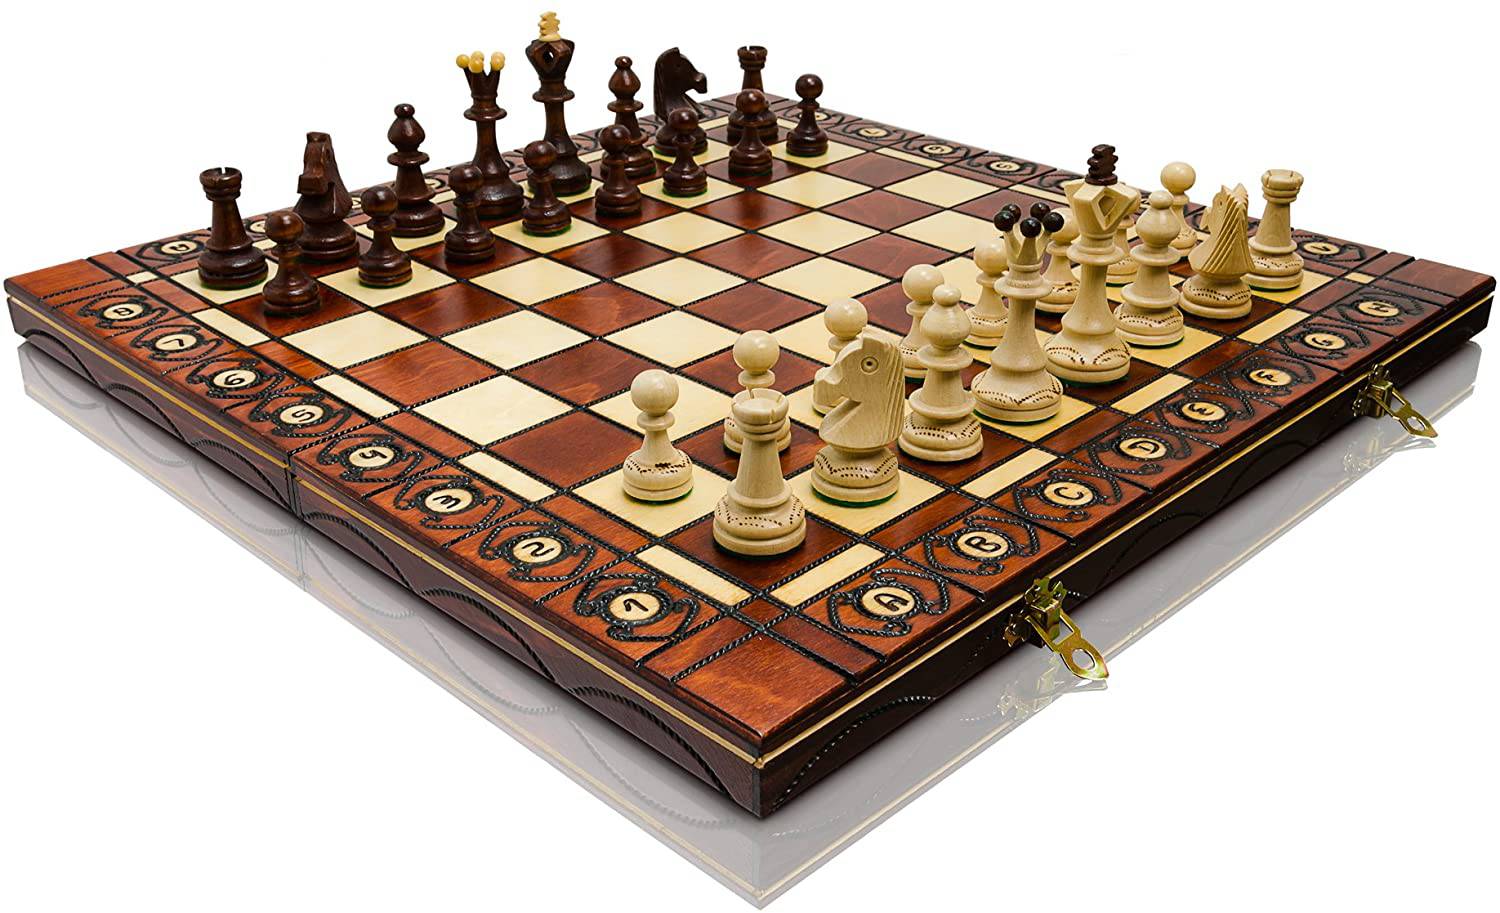  GSE Professional Tournament Chess Board Only, Sapele & Maple  Inlaid Chessboard - Chess Rules, Chess Board for Beginners, Kids, Adults  (Extra Large 21.25 x 21.25/ Square:2.25 Brown) : Toys & Games